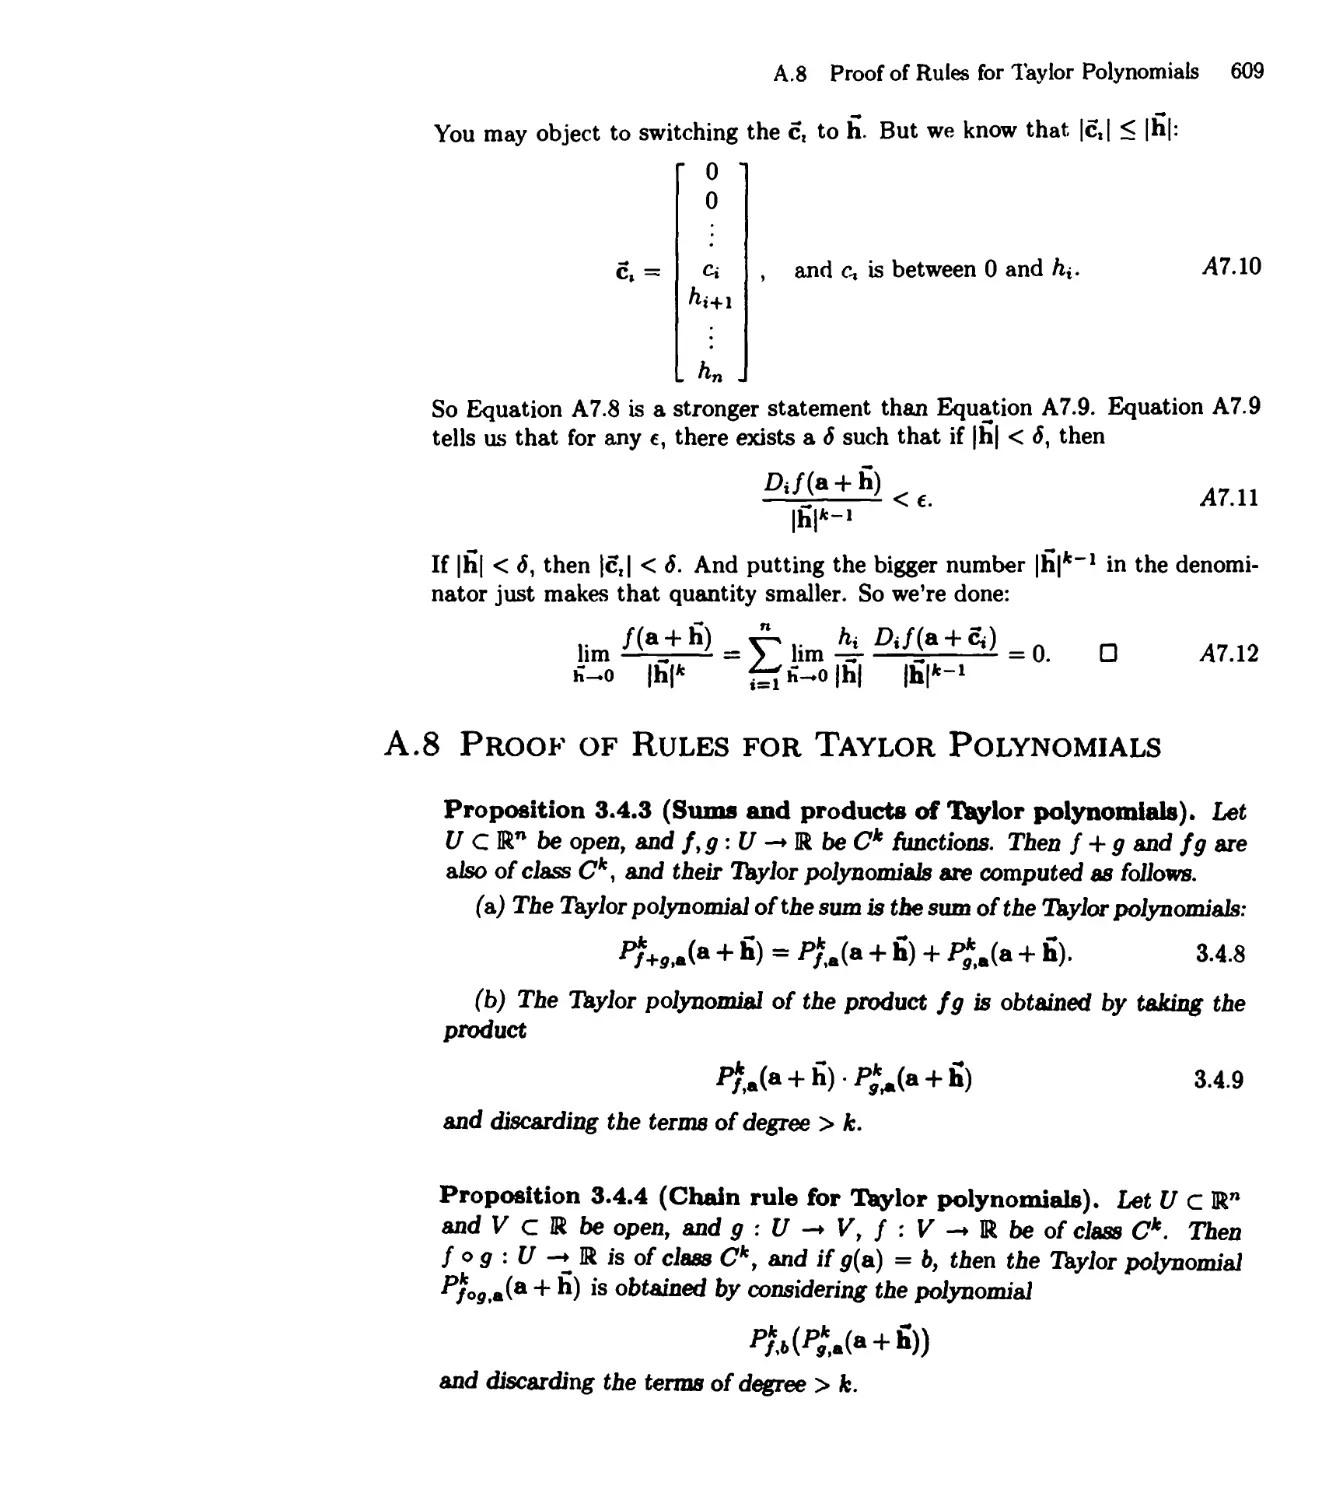 A.8 Proof of Rules for Taylor Polynomials